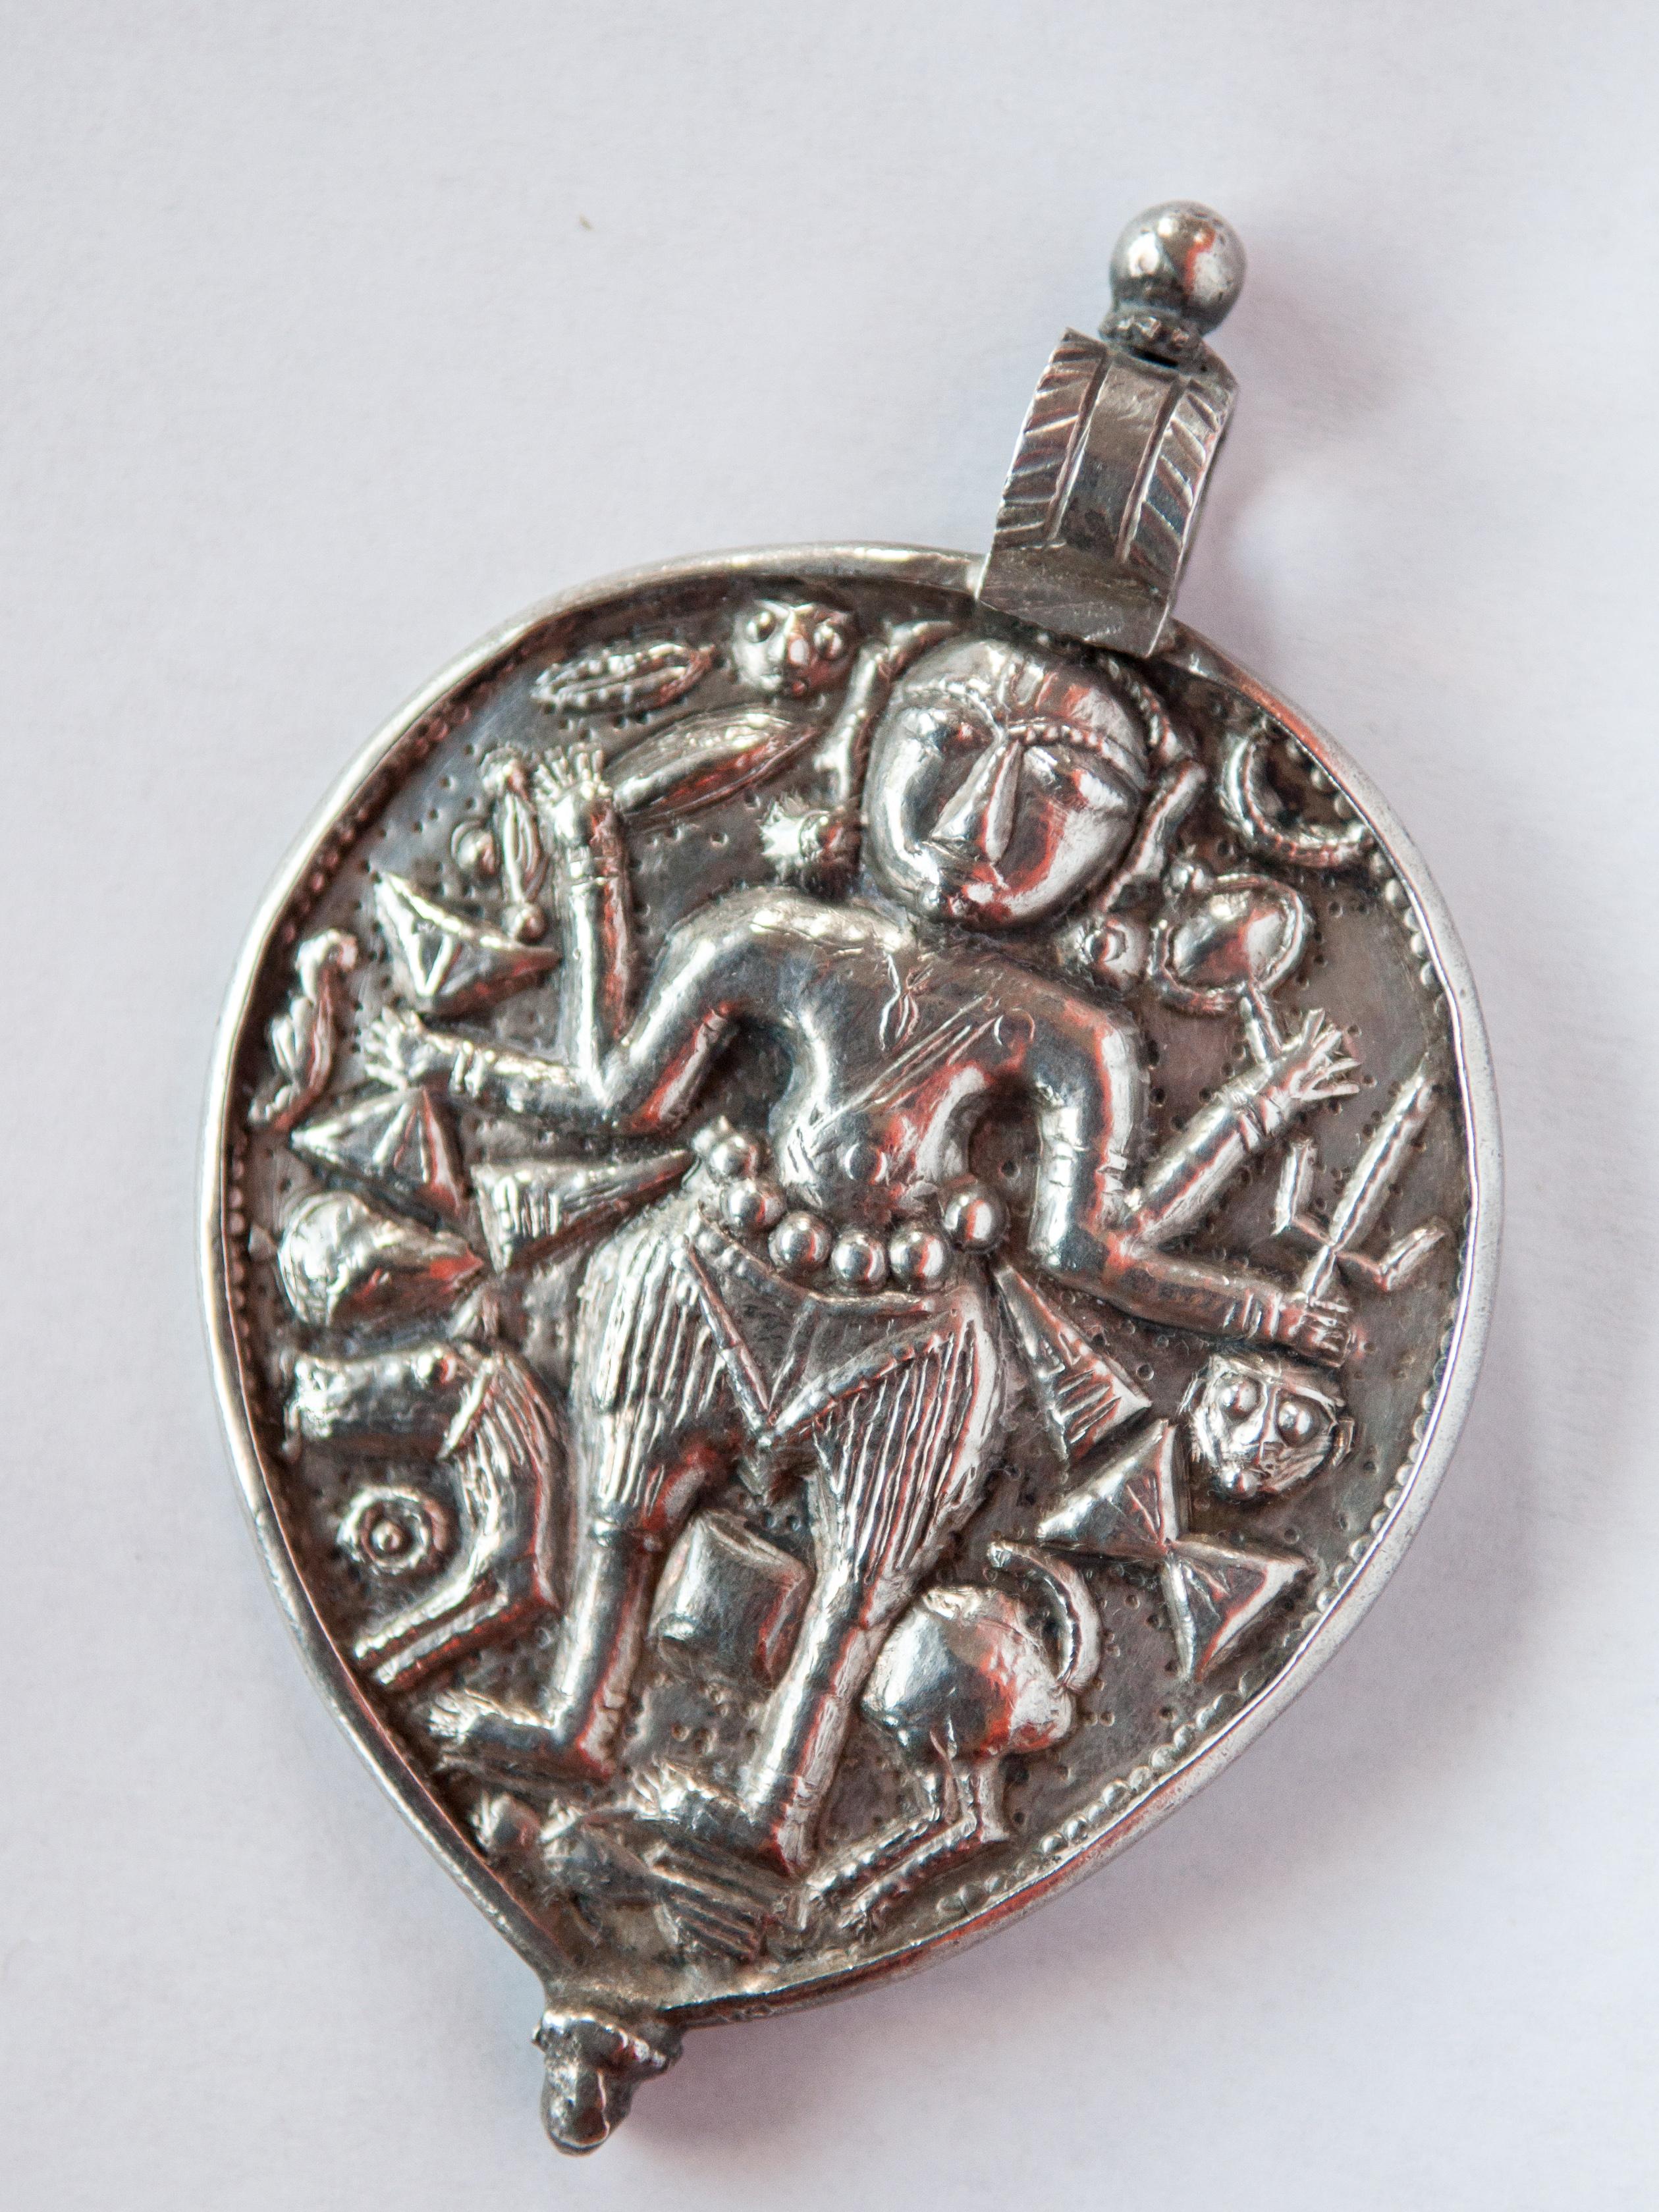 Tribal Silver Amulet Pendant from India depicting Kali. Repousse work. Mid-20th Century.
Kali is the fearsome and fearless aspect of Shakti, the great Goddess, consort of Shiva, and the manisfesting energy of creation in Indian religious cosmology.